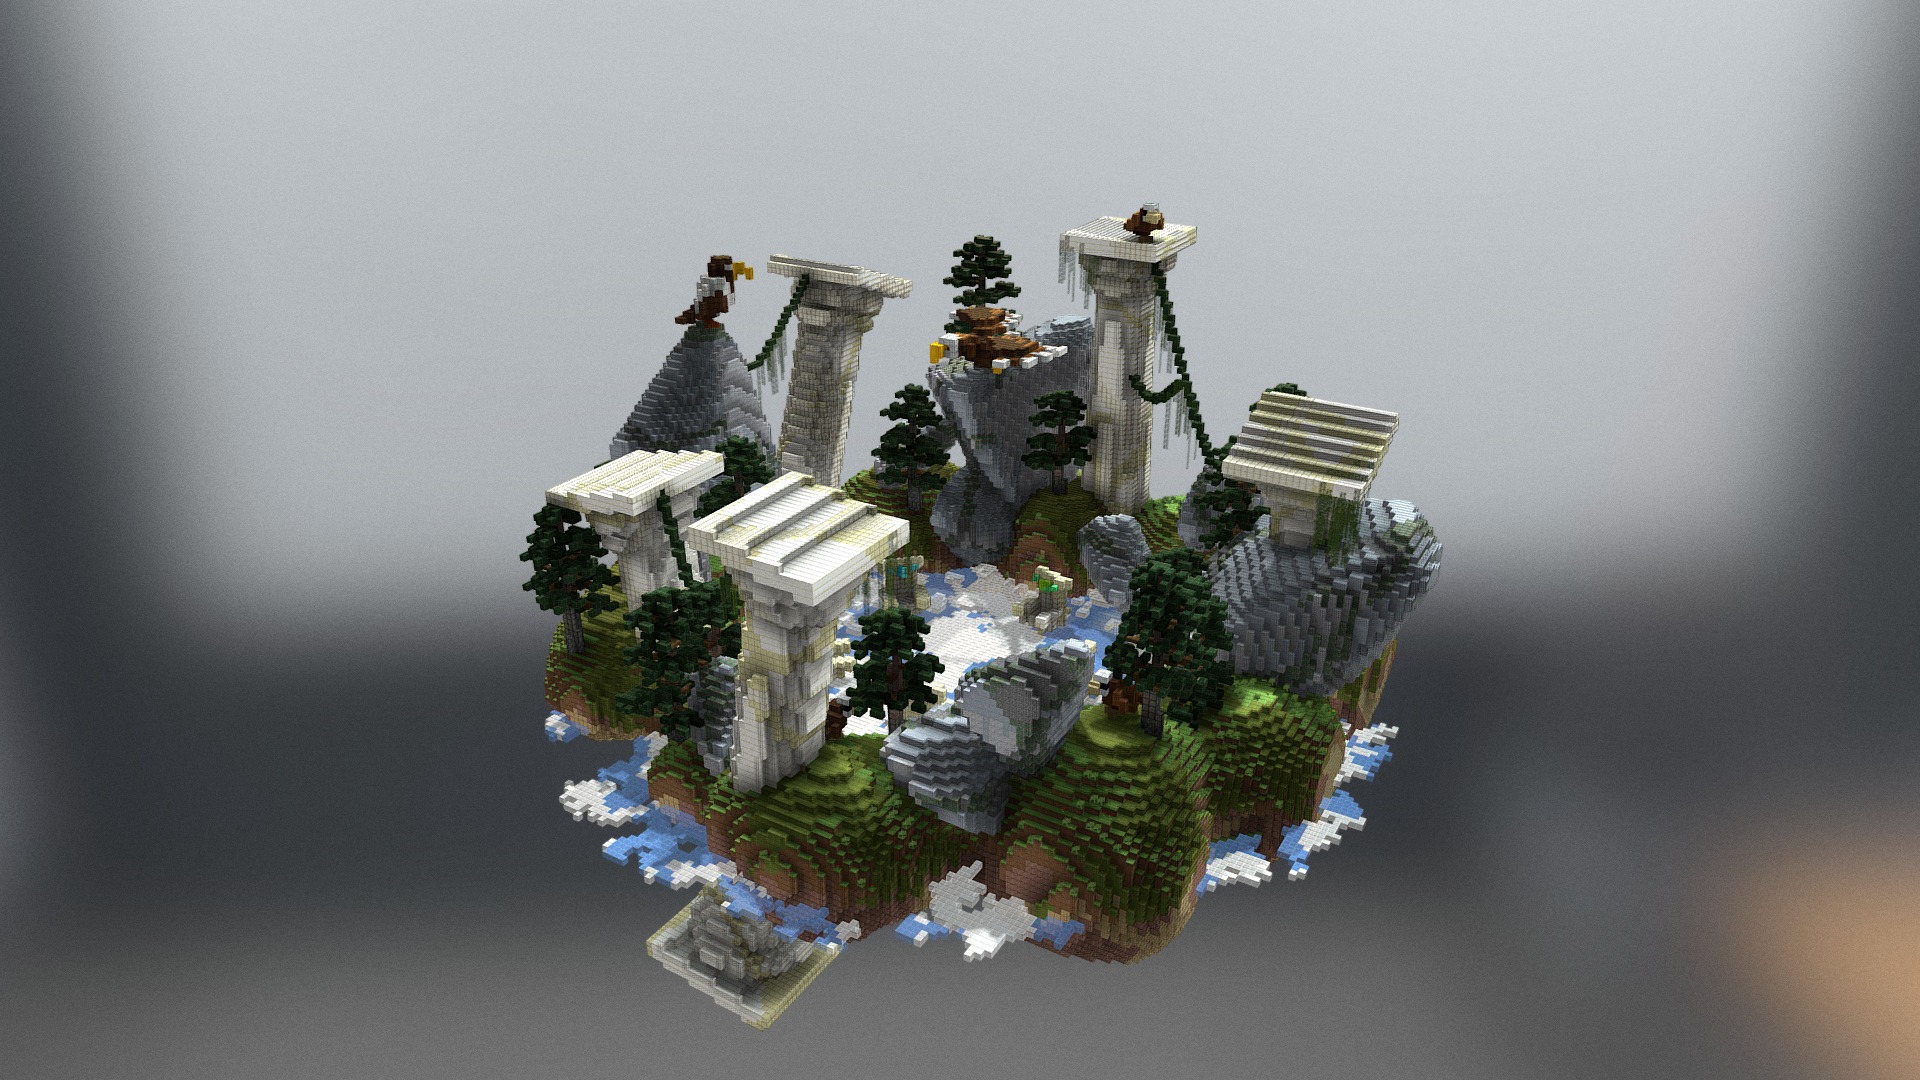 3D model Olympus PVP - This is a 3D model of the Olympus PVP. The 3D model is about a model of a house.